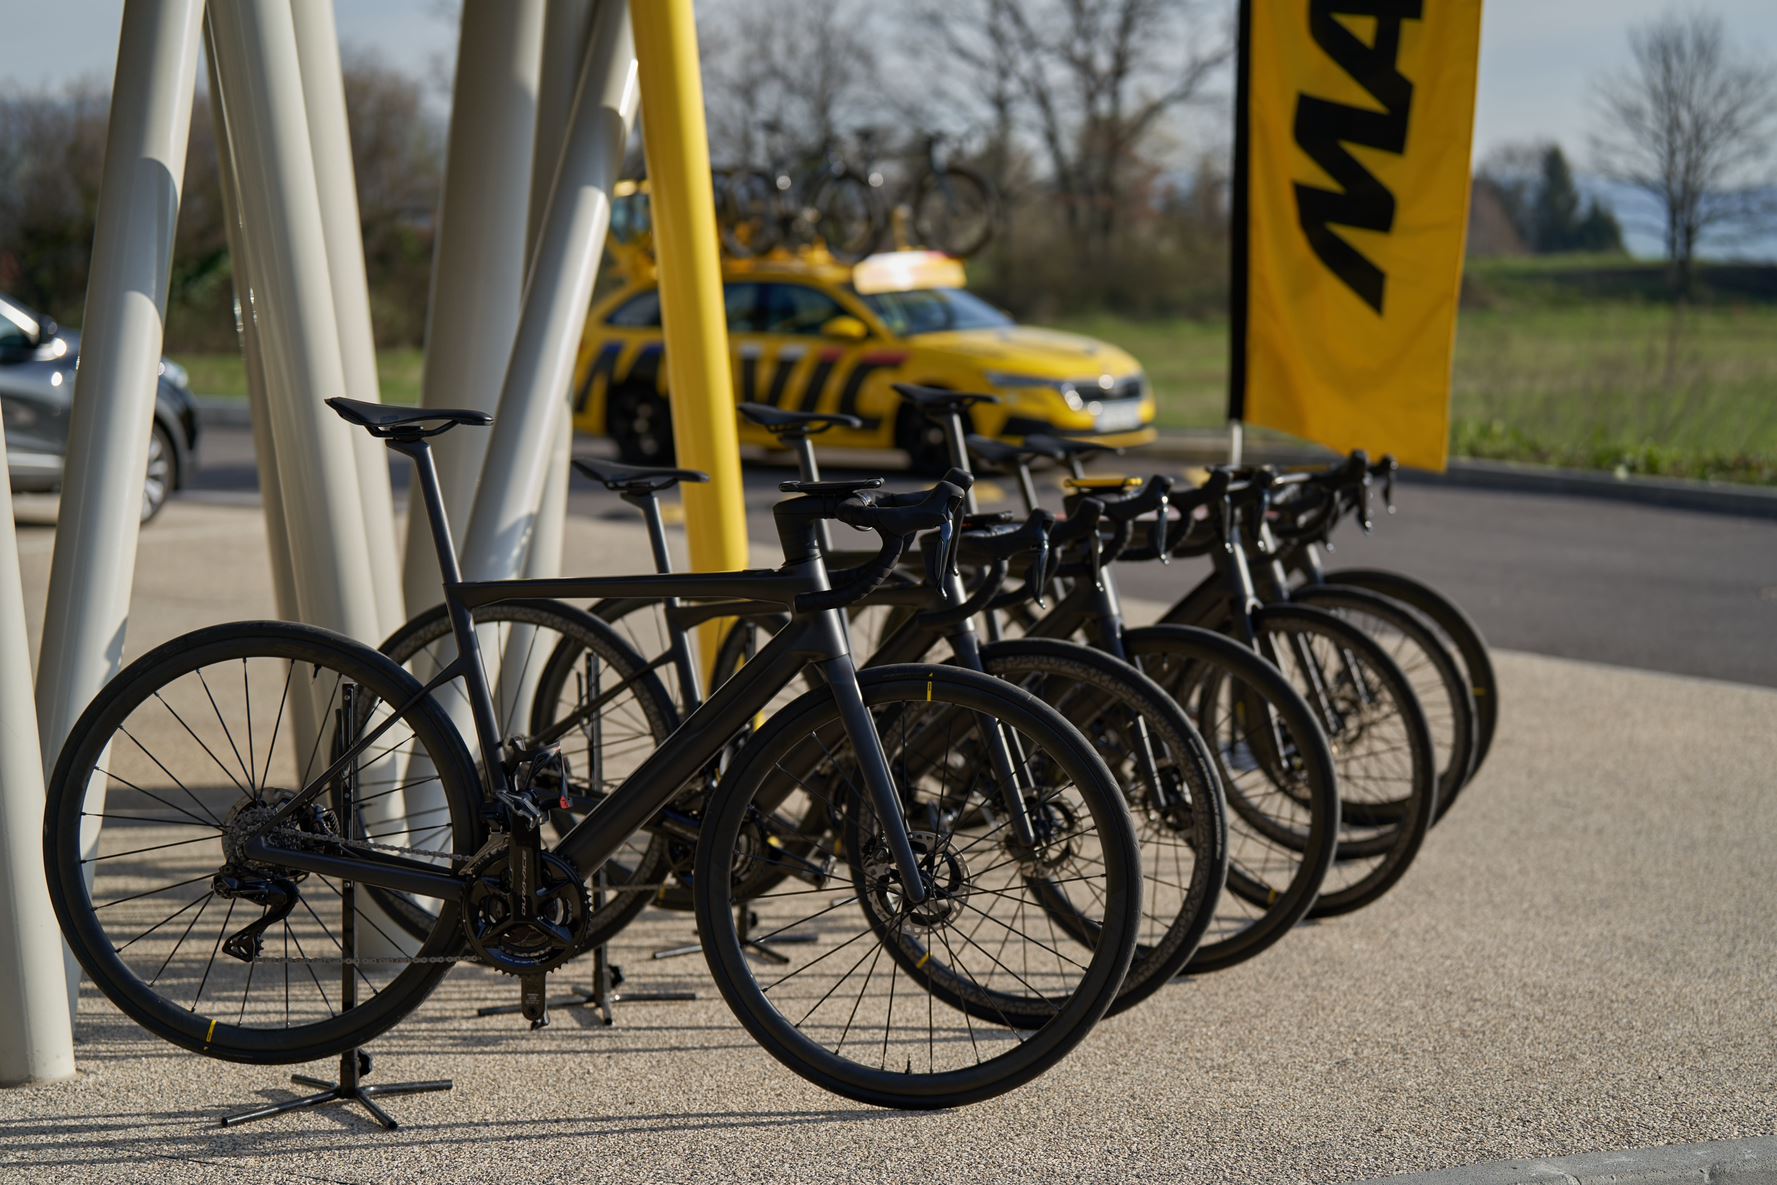 Mavic X-Tend eBikes lined up outside the Mavic HQ with flag and team car in background